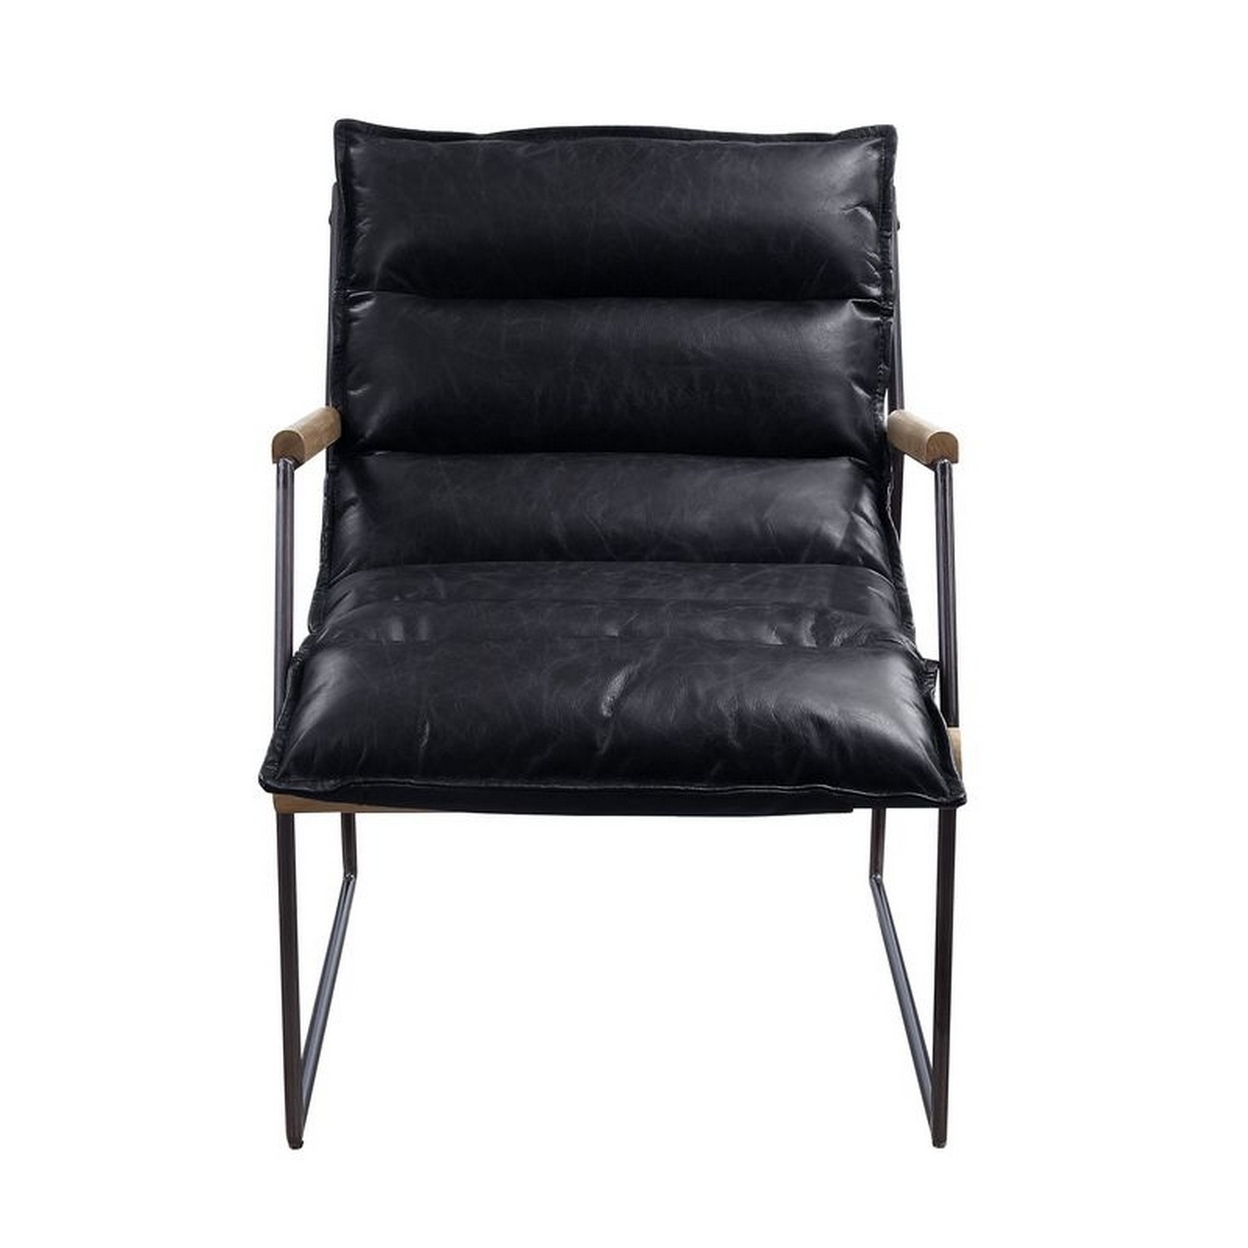 Accent Chair With Leatherette Seat And Metal Frame, Black- Saltoro Sherpi